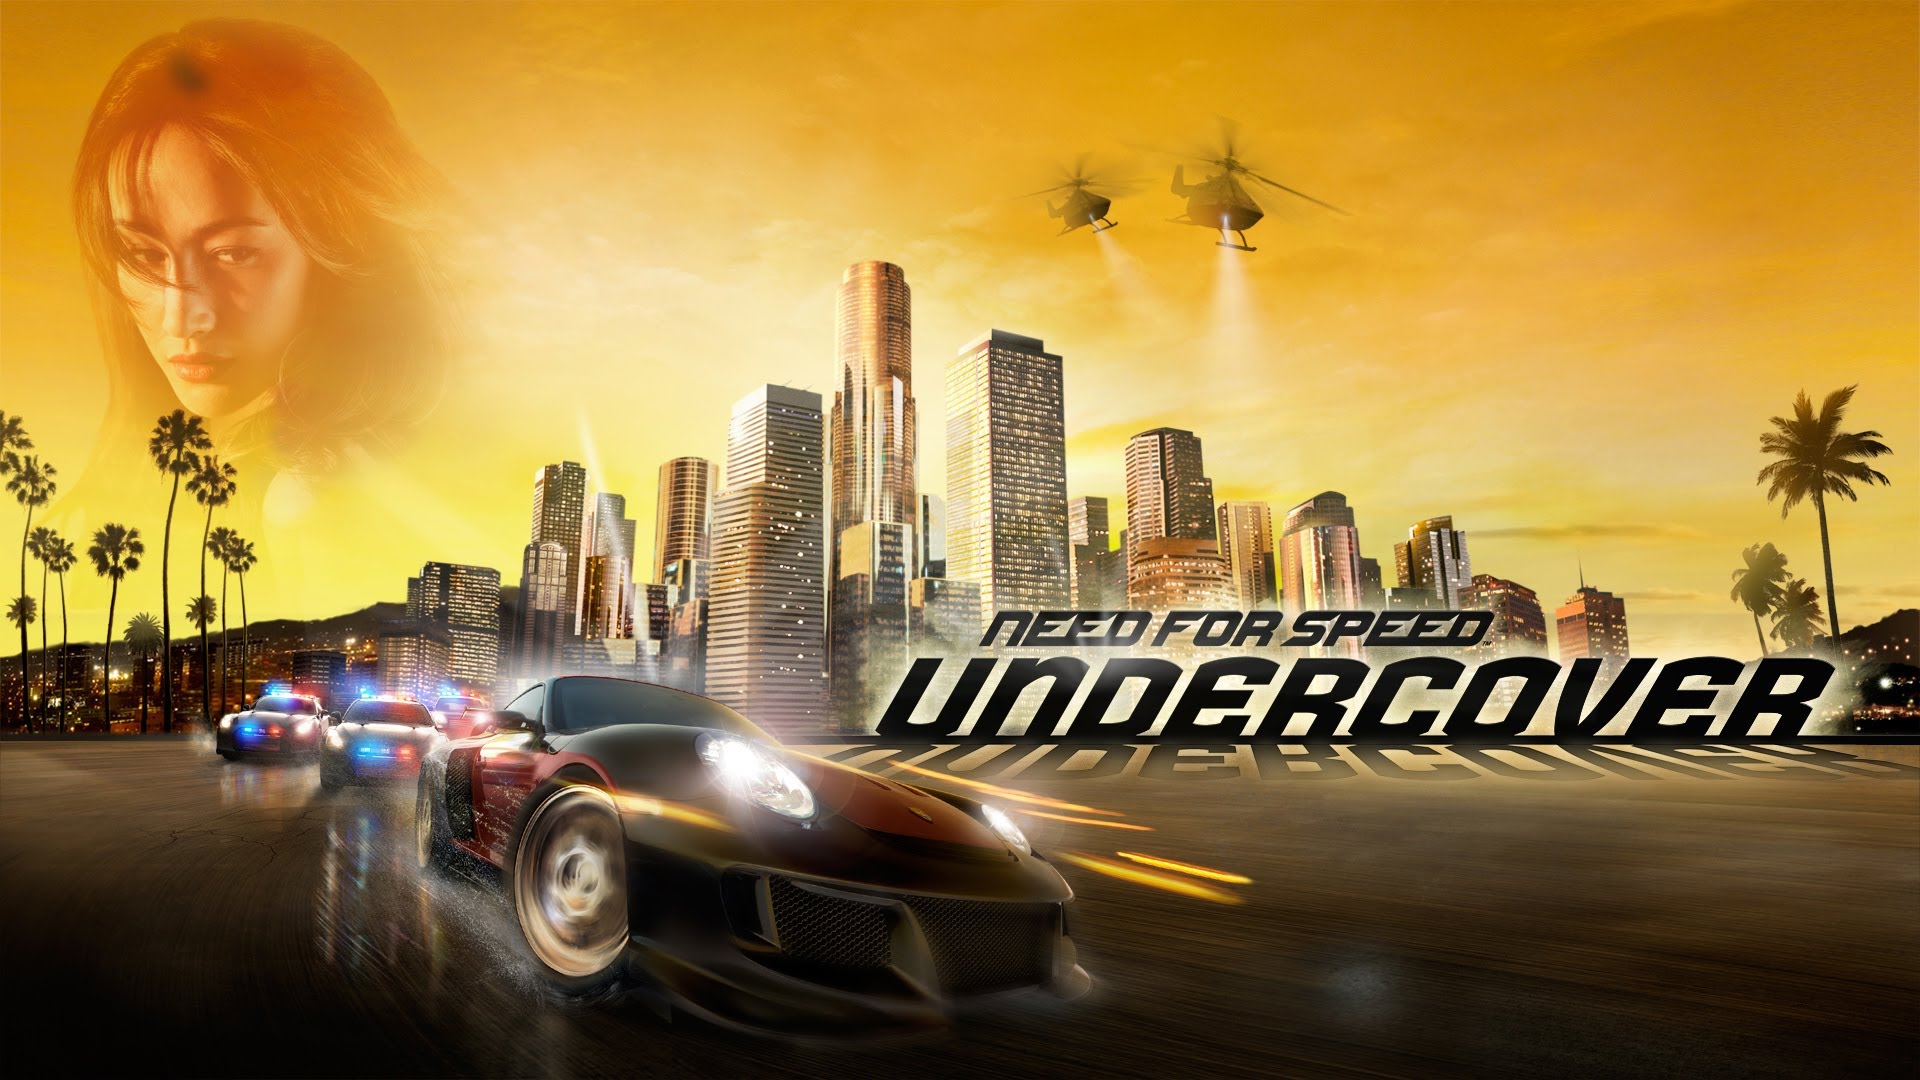 Need For Speed: Undercover HD wallpapers, Desktop wallpaper - most viewed